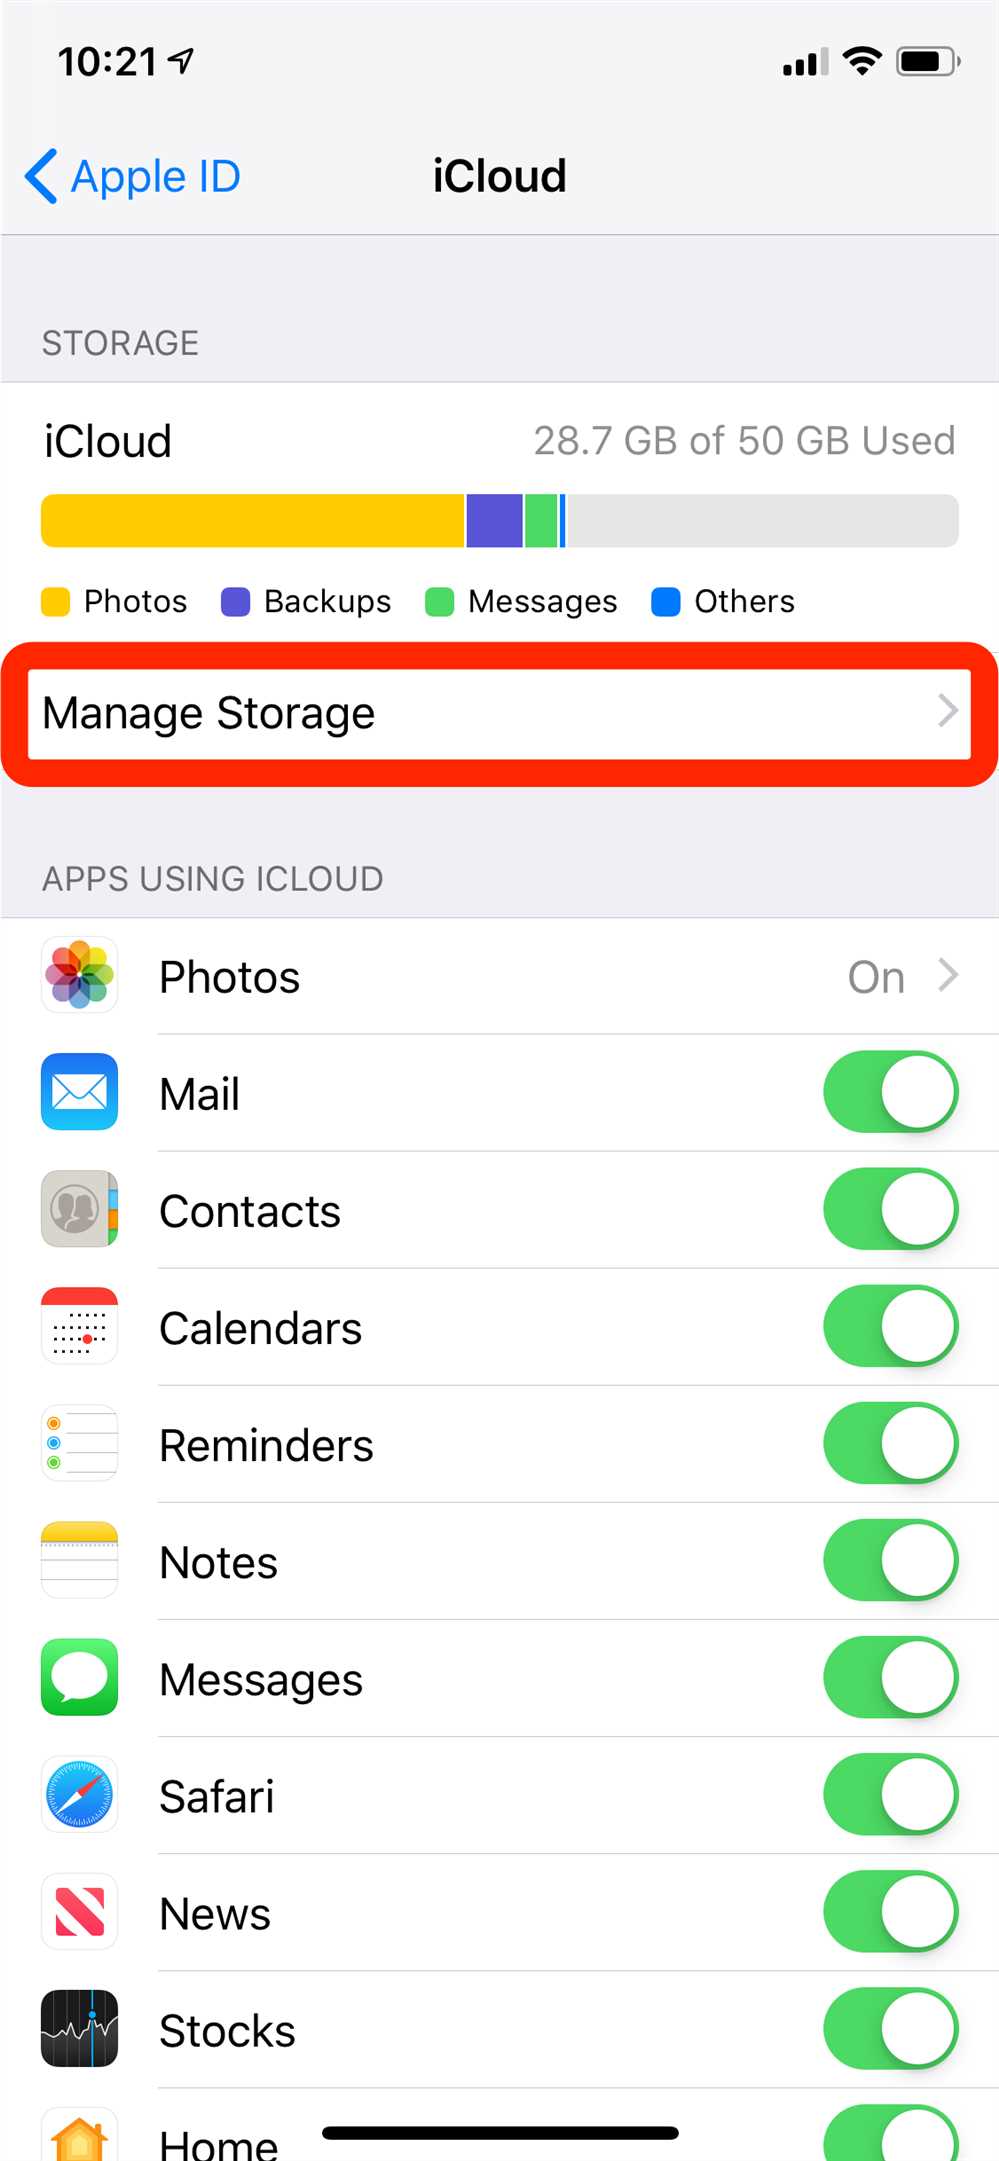 Can i buy more iphone storage